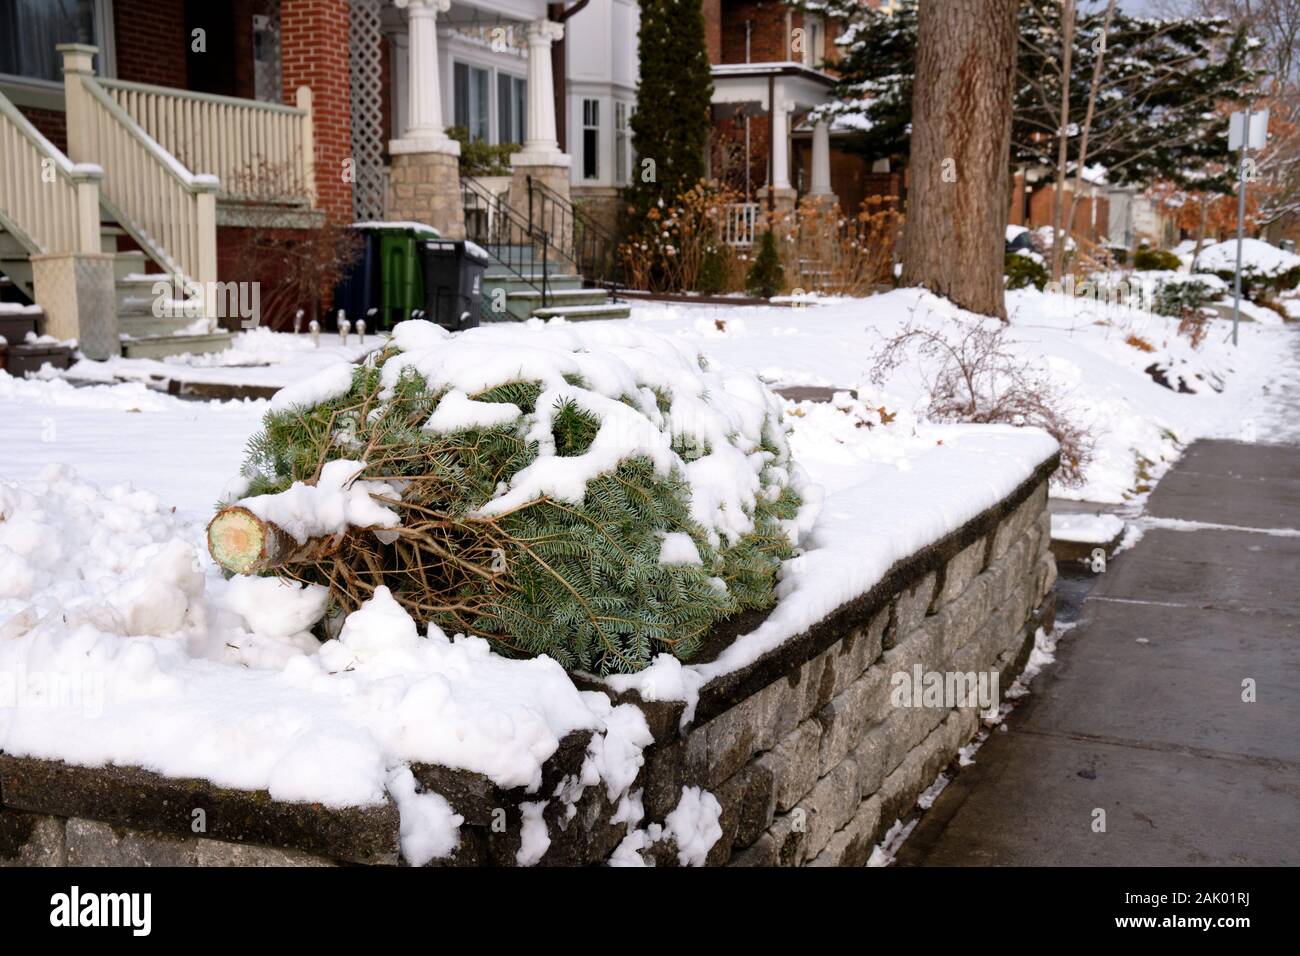 Discarded Christmas tree left of curb covered in fresh snow in residential area of Toronto Stock Photo